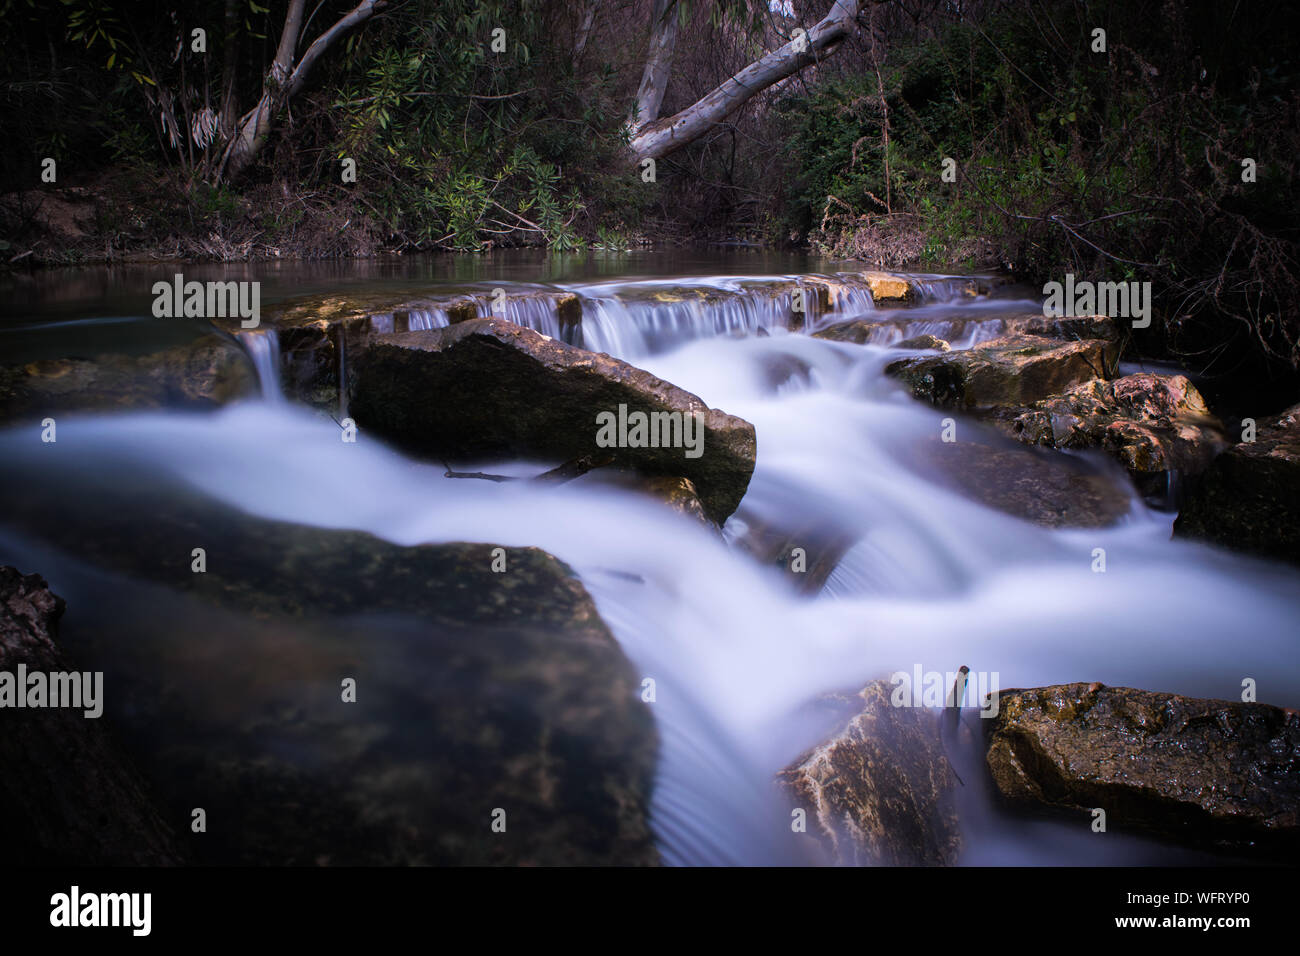 The flow of water alongside the stream stones Stock Photo